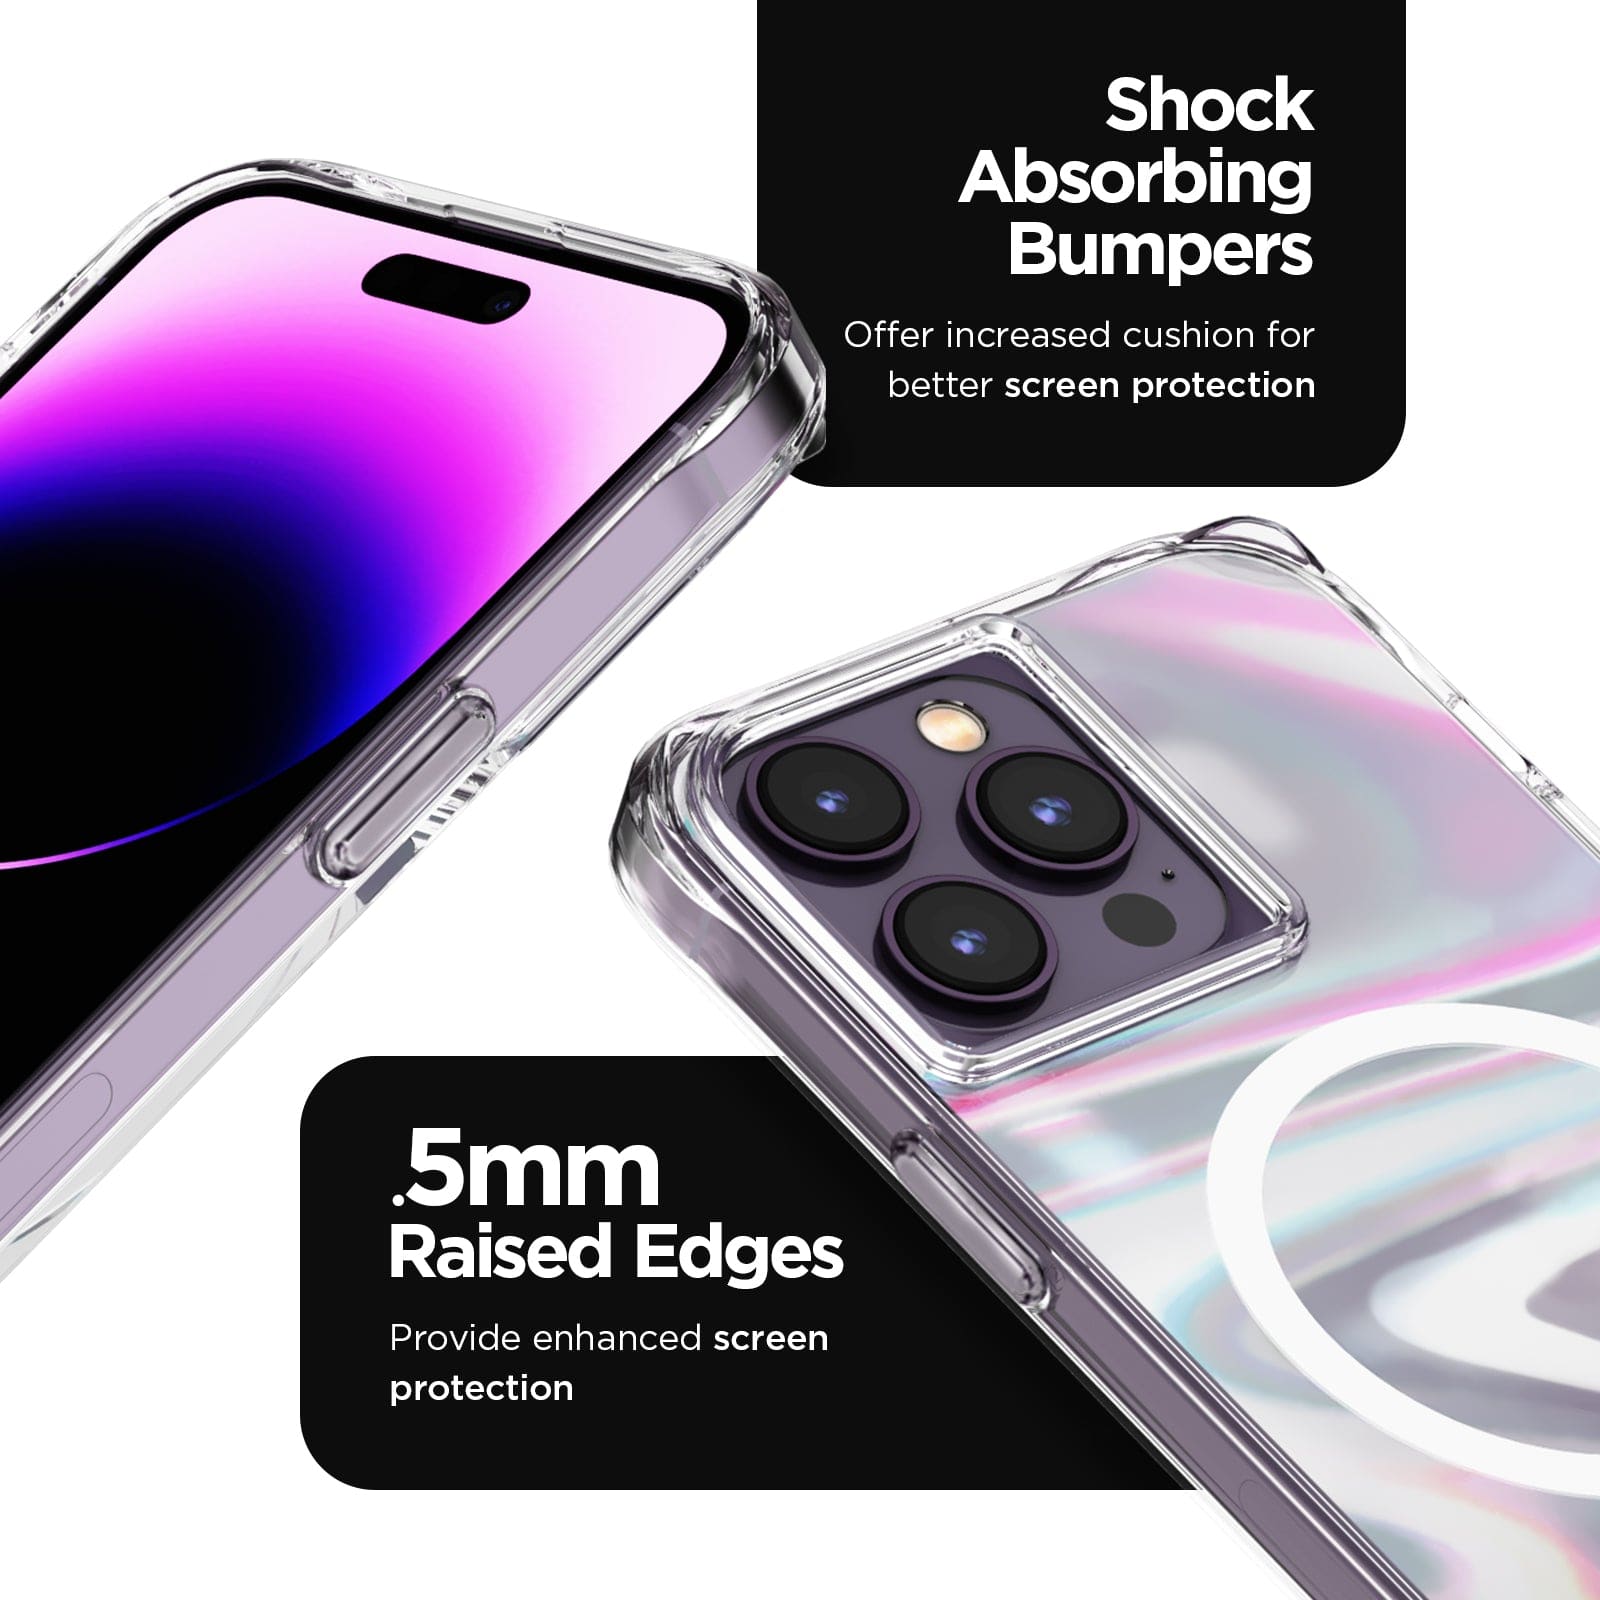 SHOCK ABSORBING BUMPERS OFFER INCREASED CUSHION FOR BETTER SCREEN PROTECTION. .5MM RAISED EDGES. PROVIDE ENHANCED SCREEN PROTECTION. 